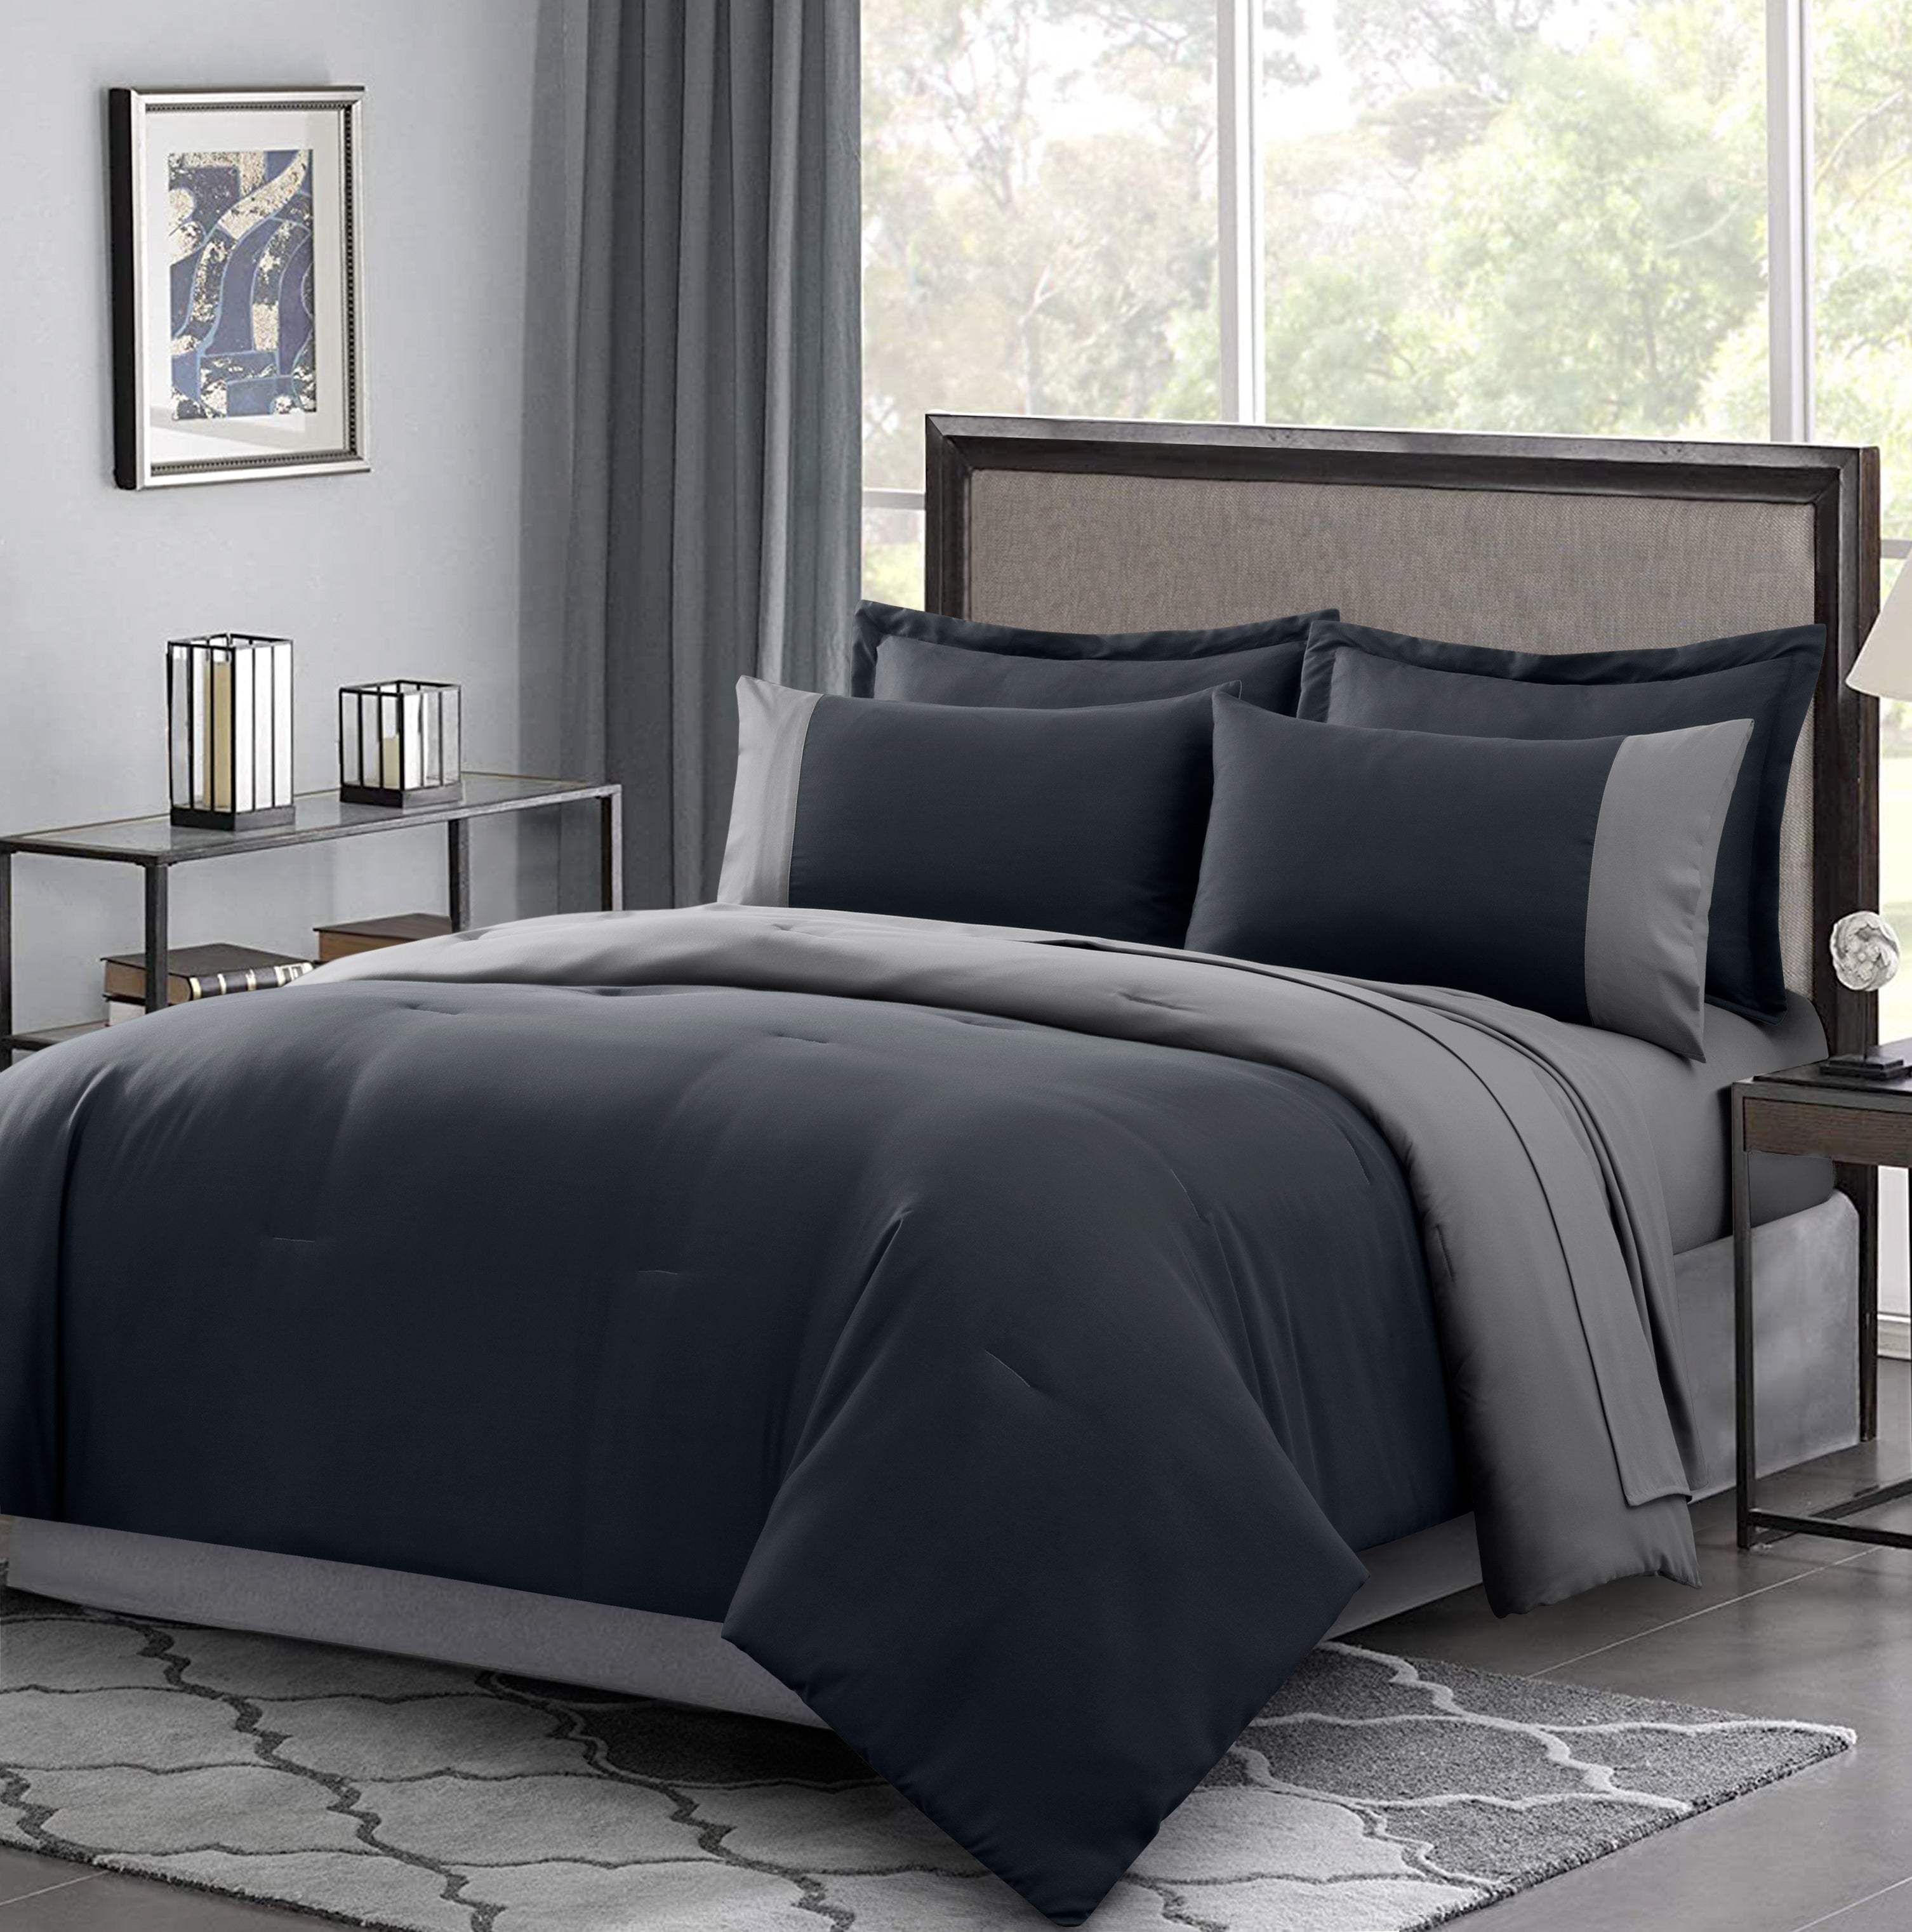 7-Piece Comforter Set - Bed-in-a-Bag, Reversible Bedding Sets with Comforter, Flat & Fitted Sheets, Pillow Shams & Cases, All Season & Machine Washable